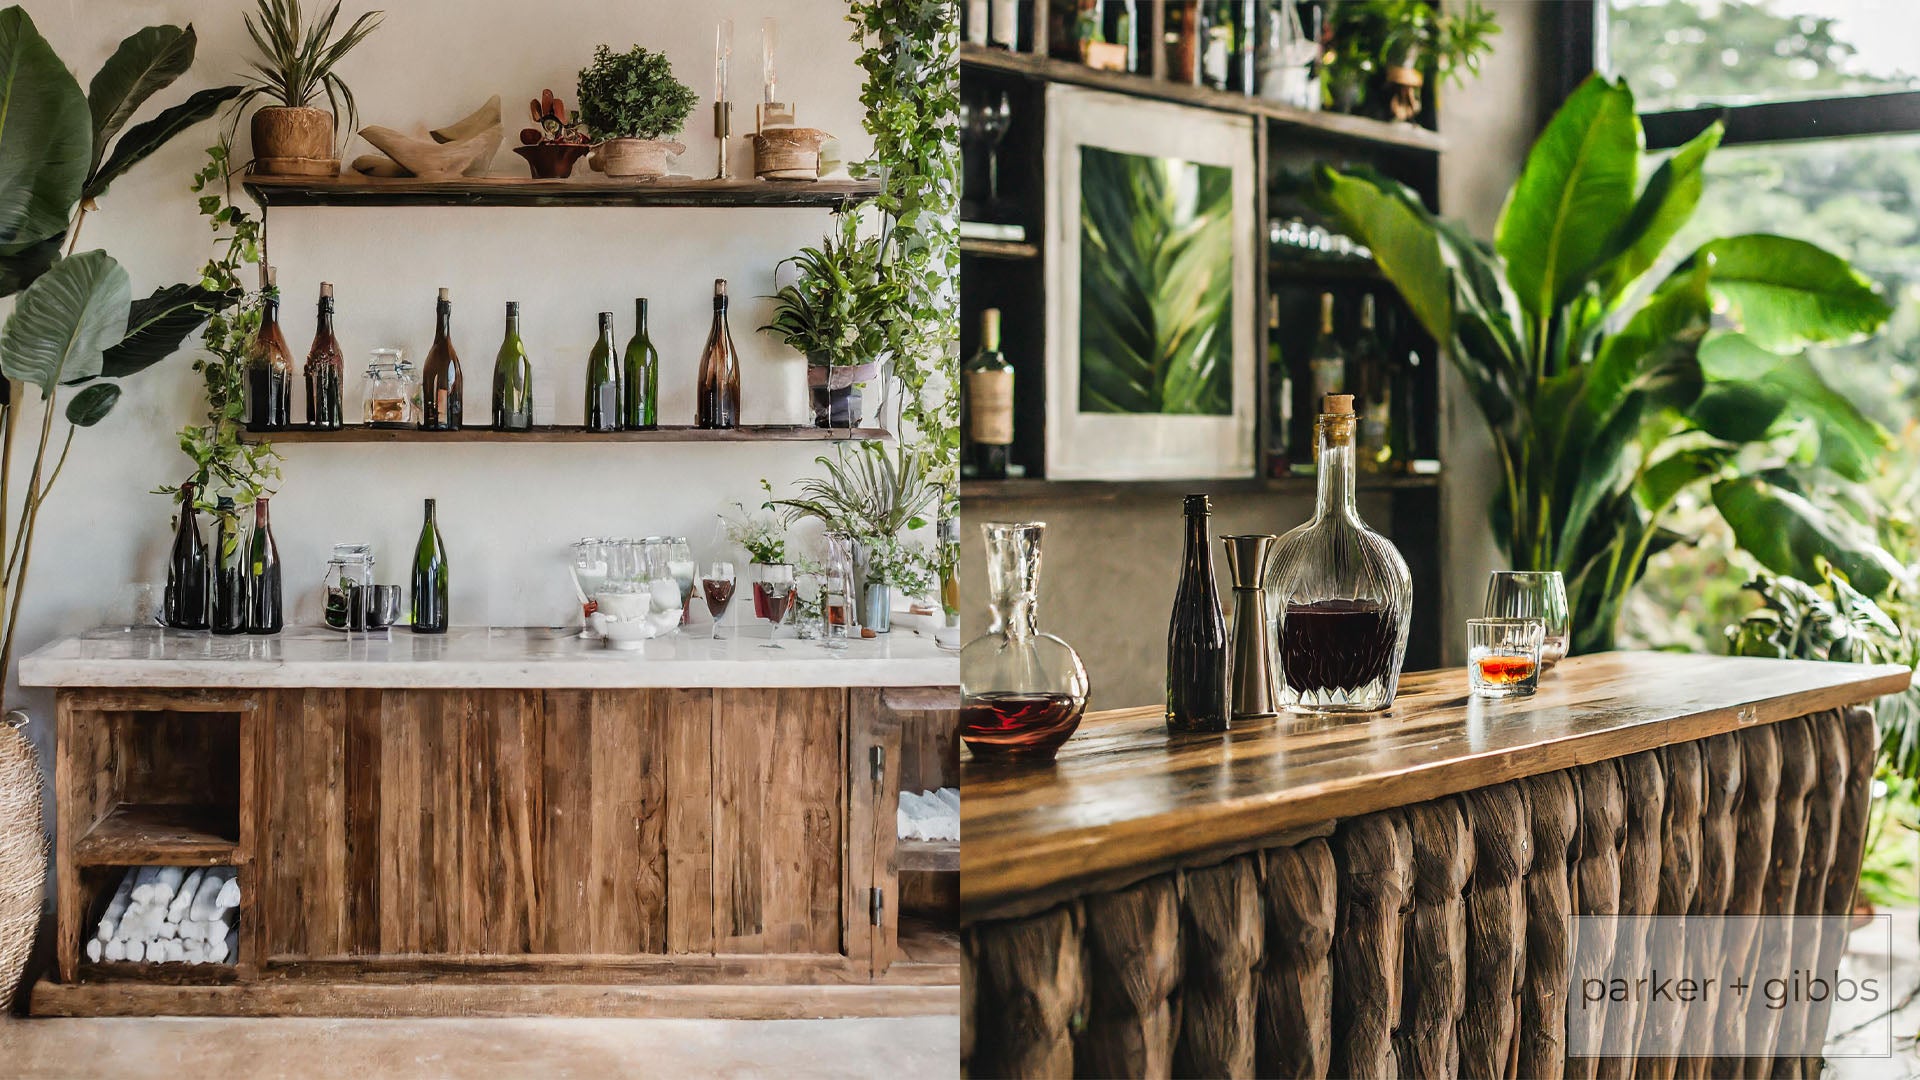 Images of a California style home bar and a tropical style home bar.